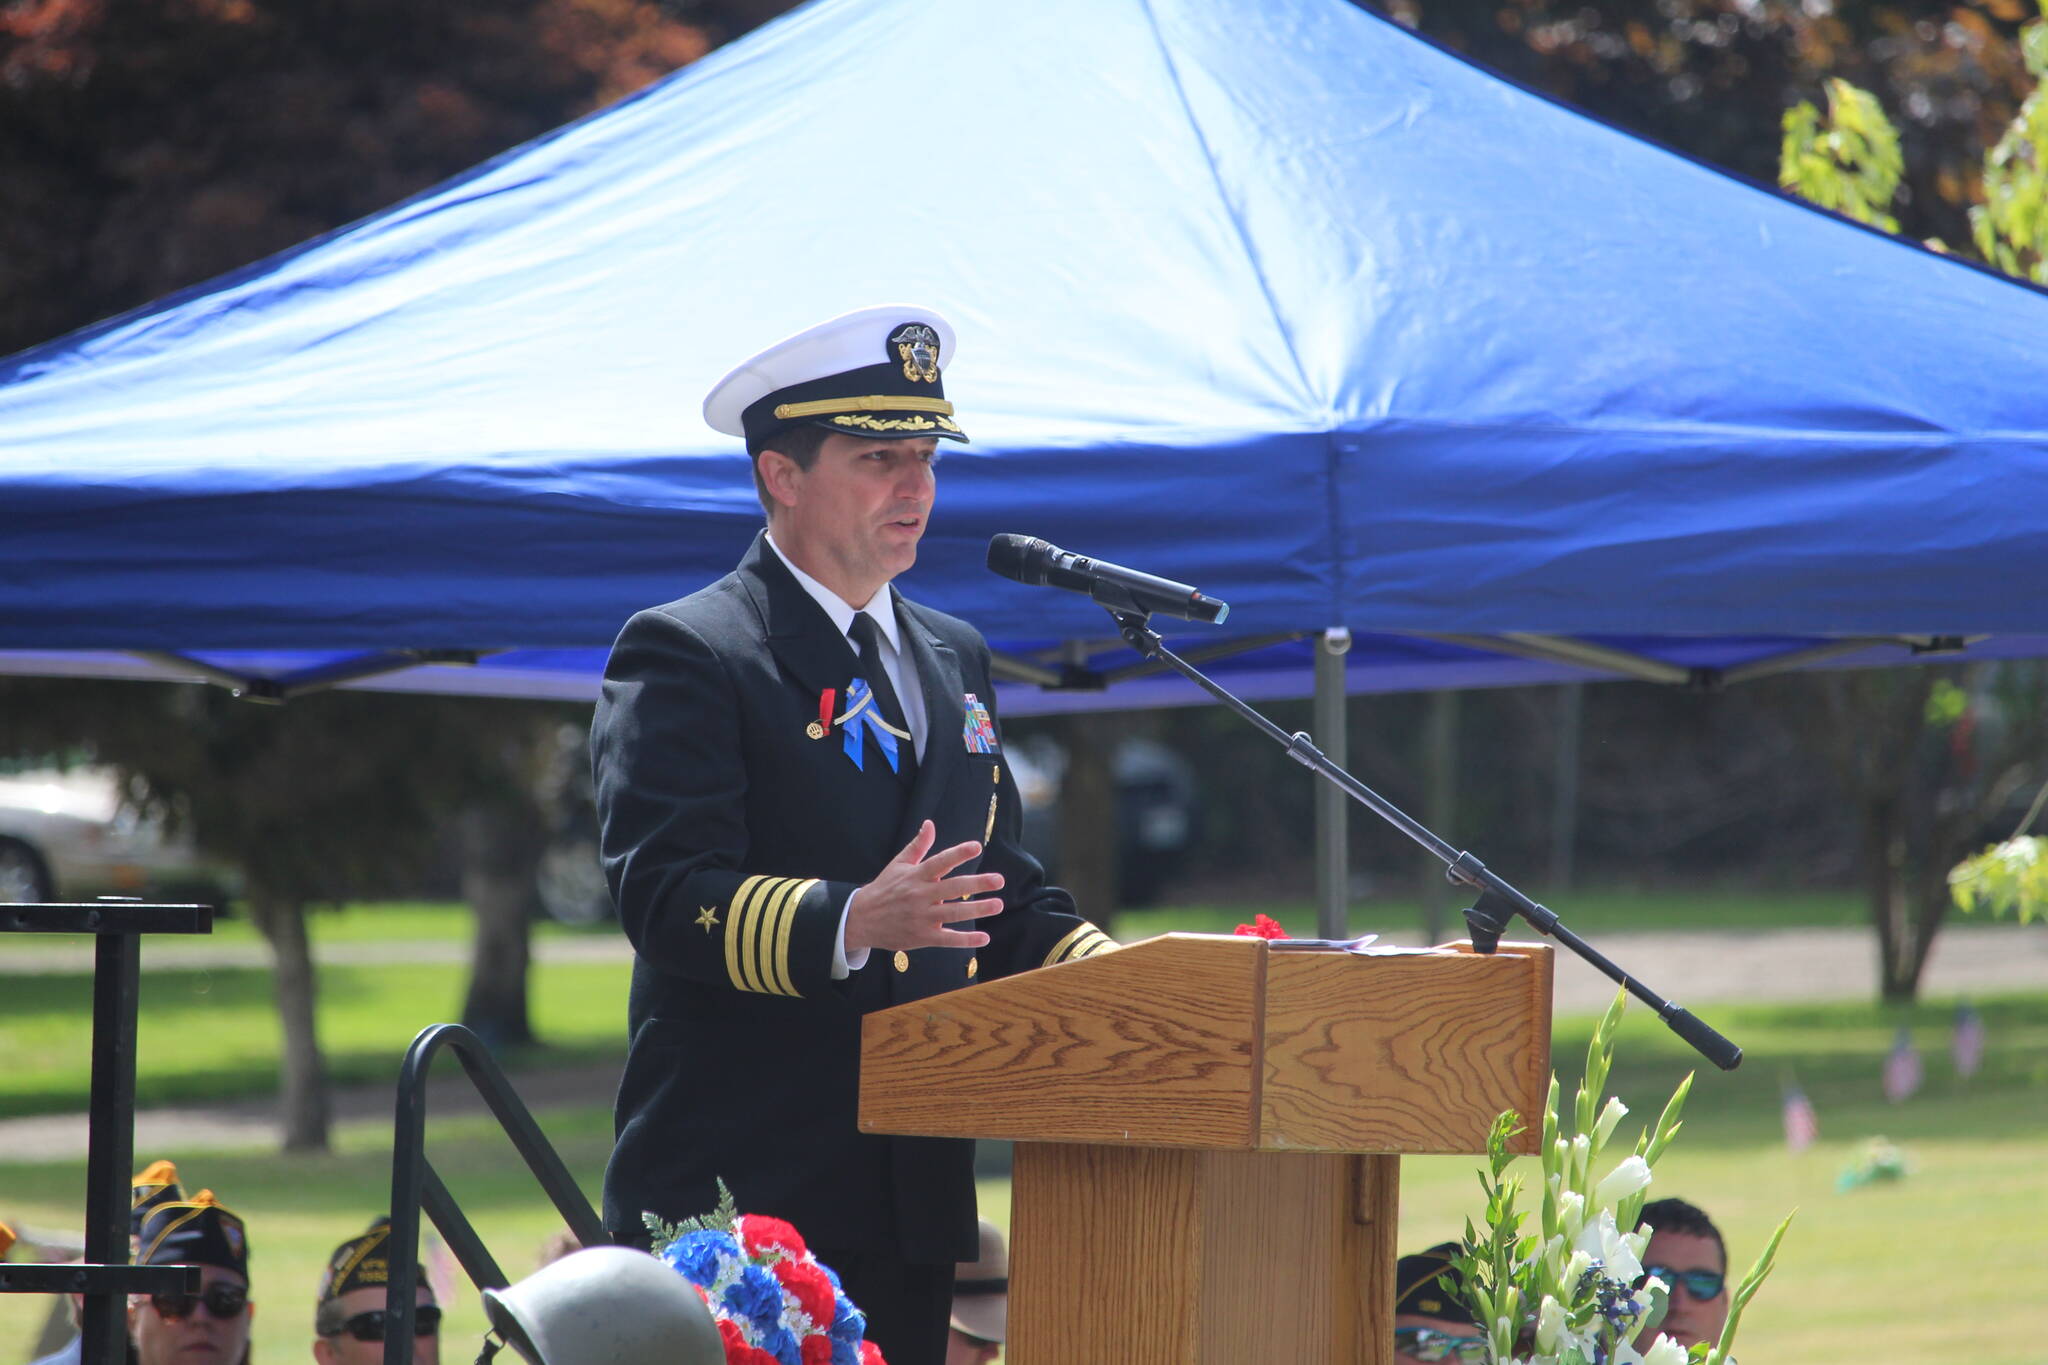 Photo by Karina Andrew/Whidbey News-Times
Capt. Eric Hanks speaks at Maple Leaf Cemetery on Memorial Day.